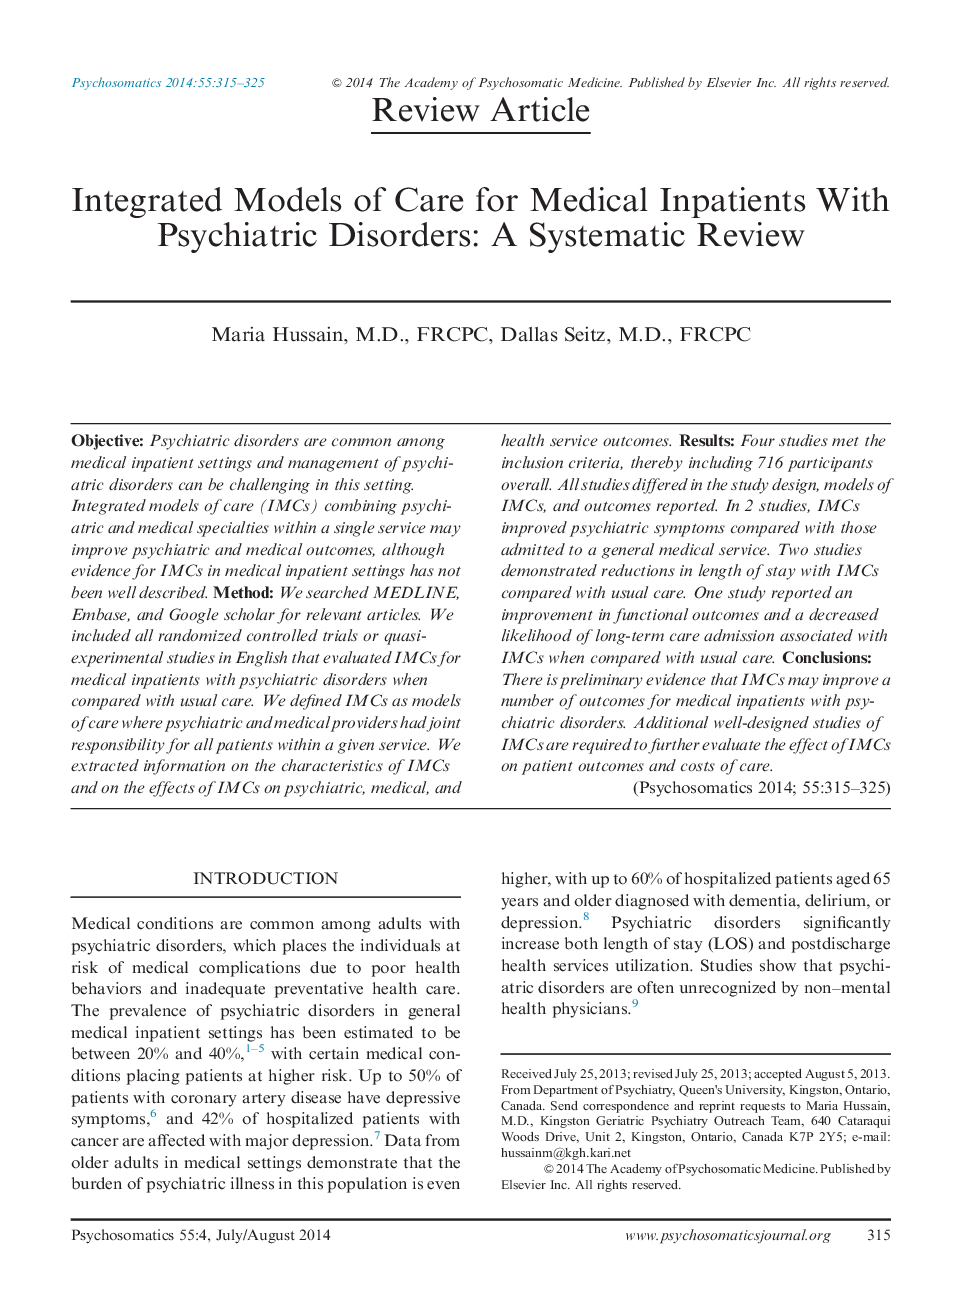 Integrated Models of Care for Medical Inpatients With Psychiatric Disorders: A Systematic Review